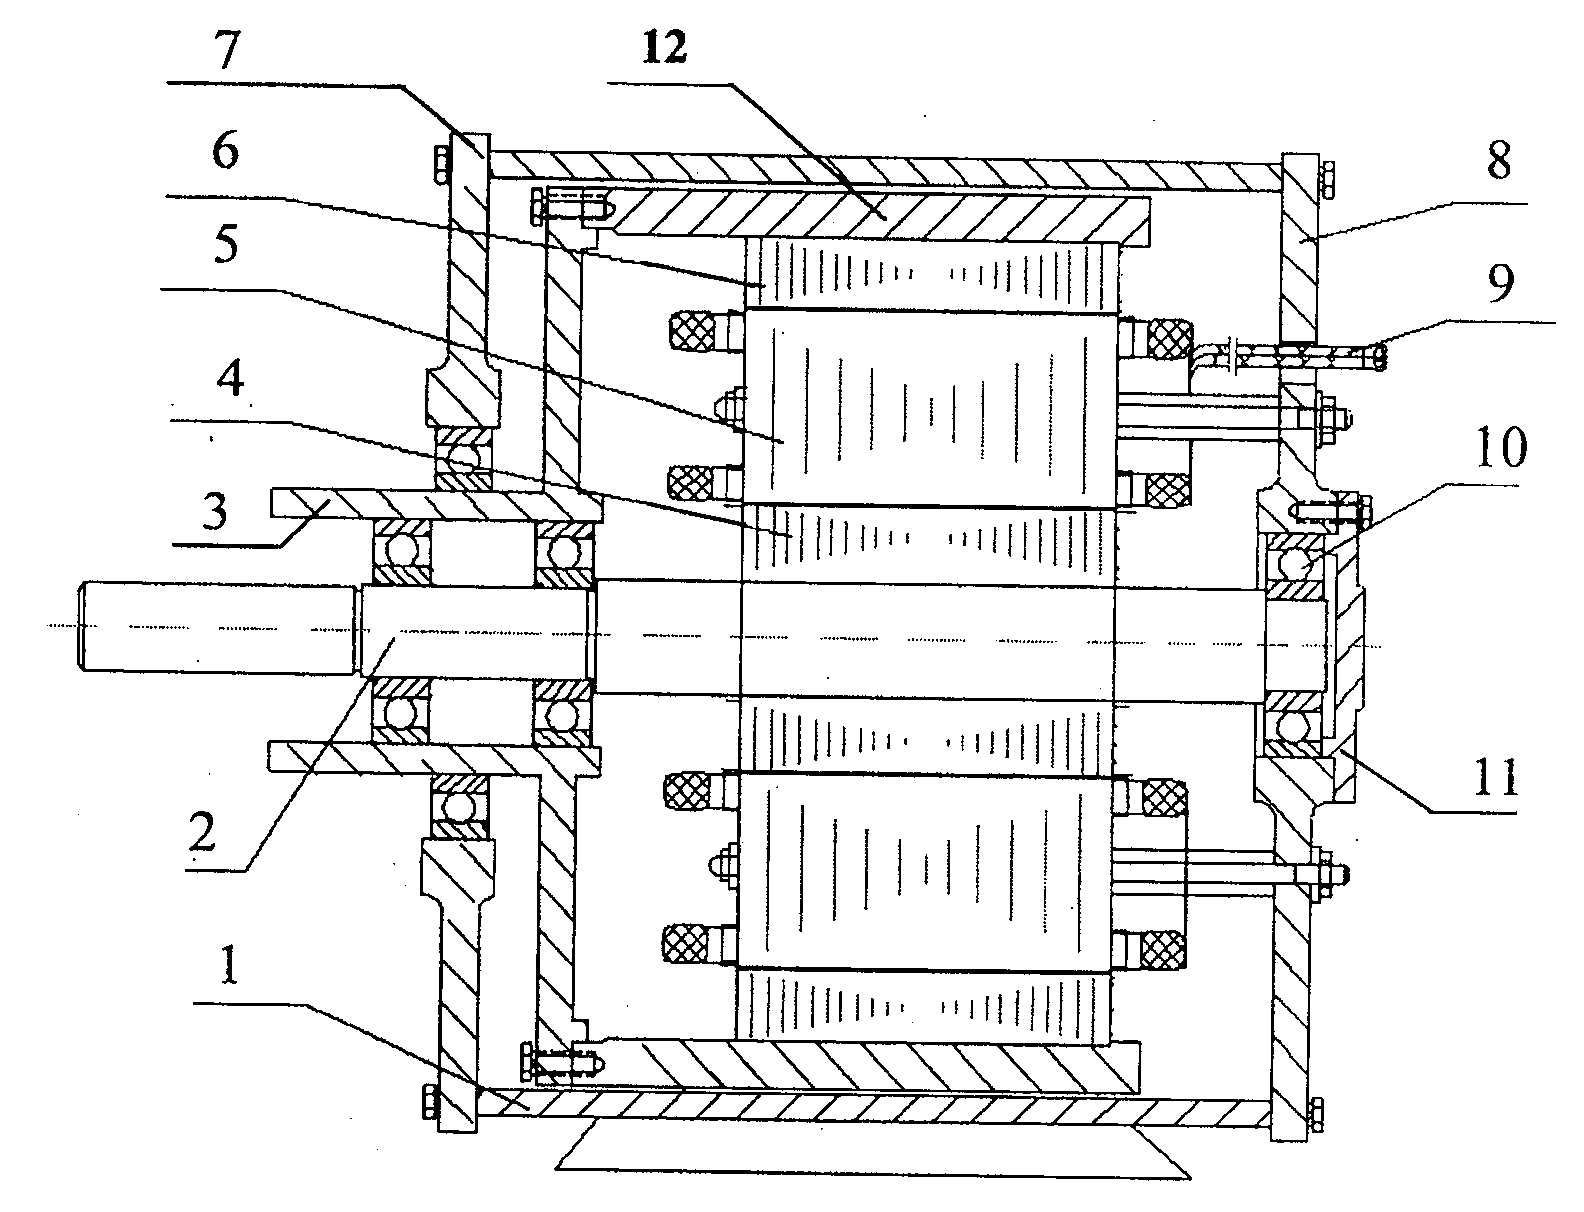 Integrated alternating current electric motor for mixed power automobile